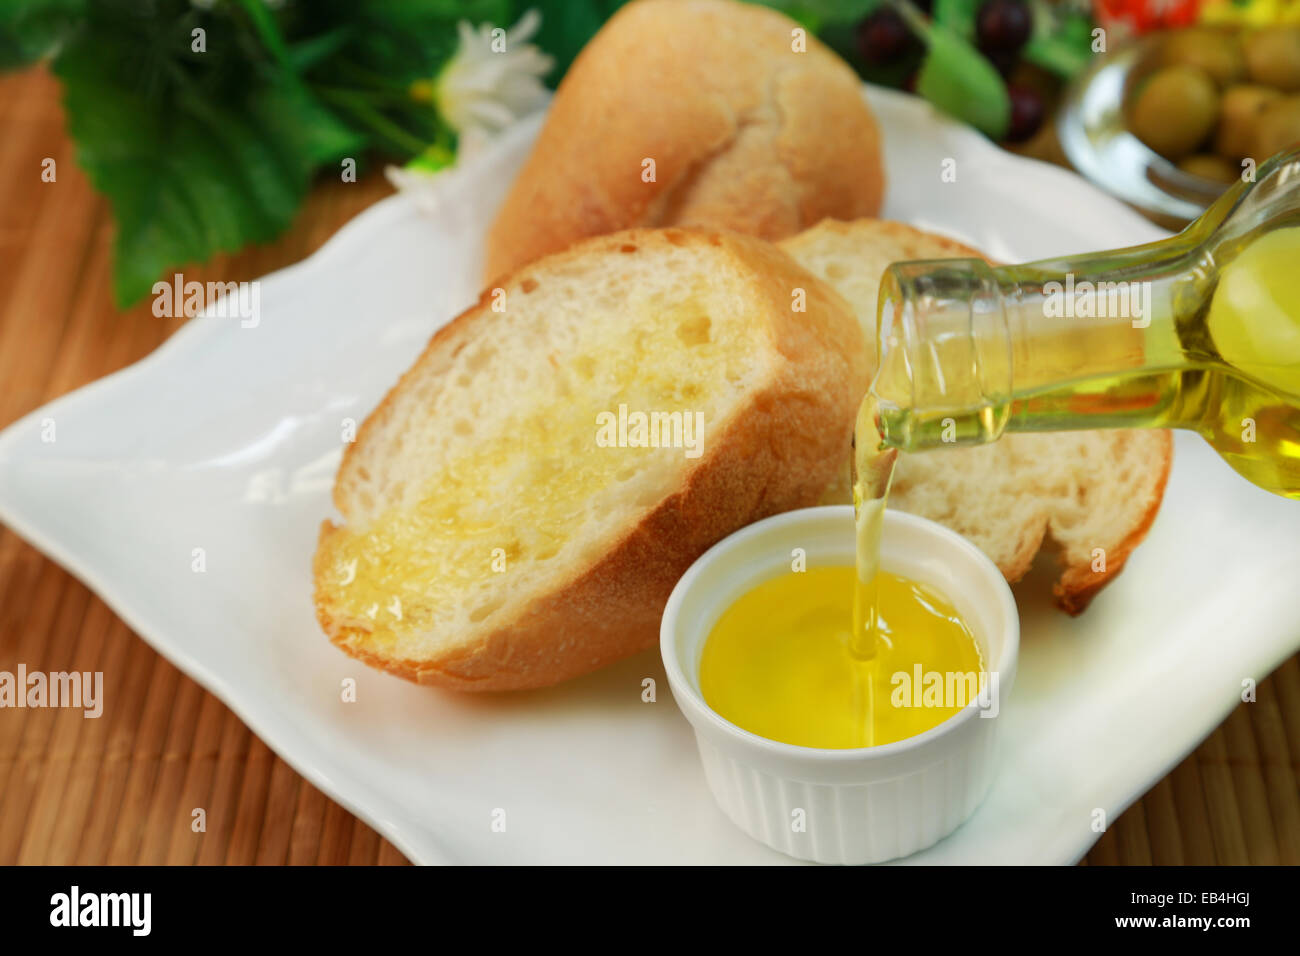 Bread with Olive Oil Stock Photo